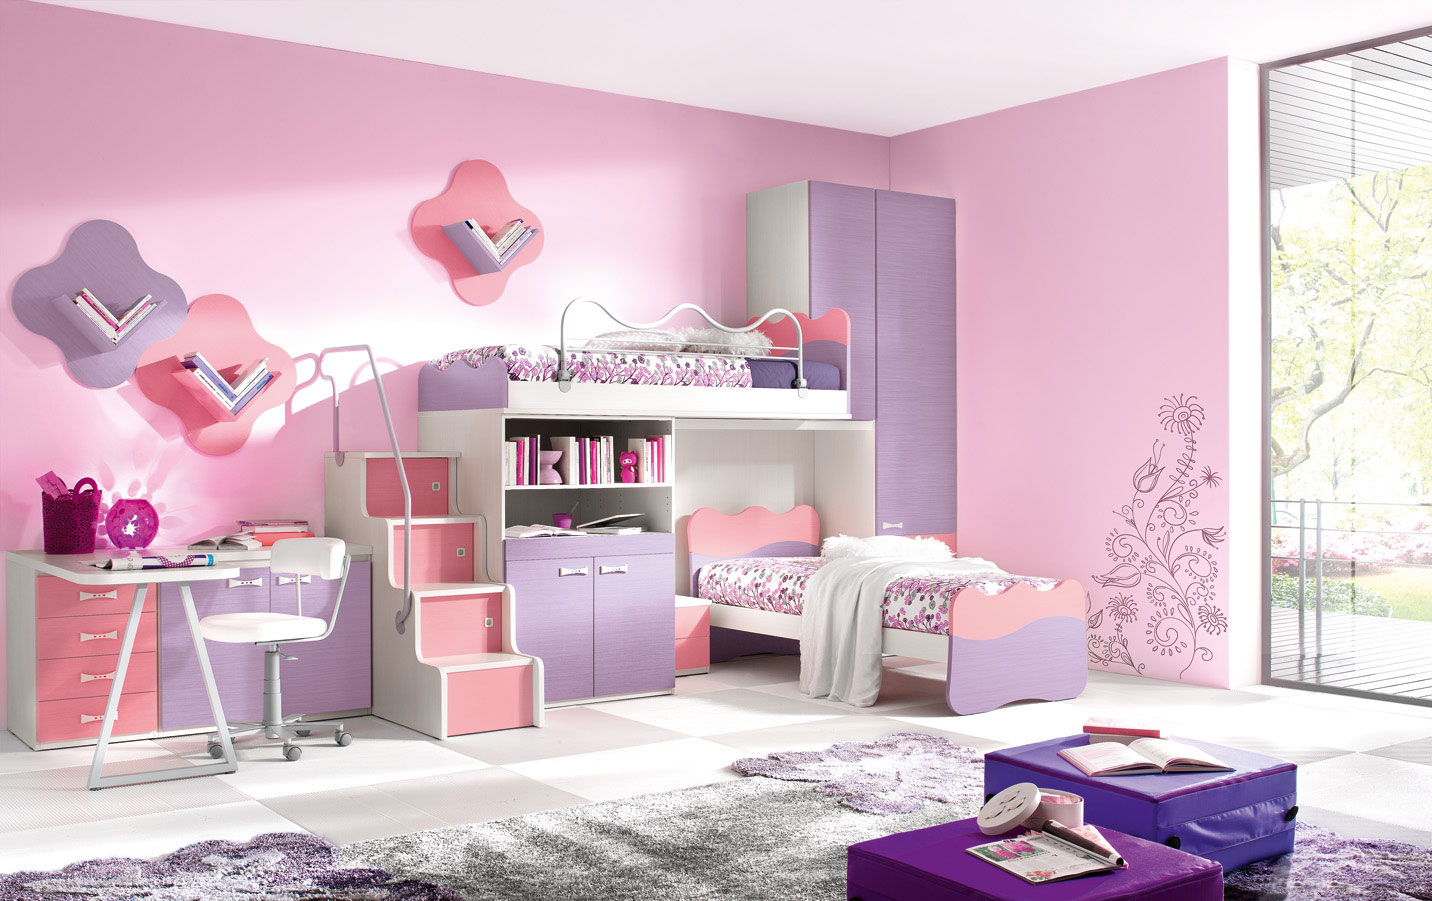 Purple Pink Ideas Surprising Purple Pink Cute Bedroom Ideas For Teenage Girls With Bunk Beds Combined With Cupboards Furnished With Desk And White Chair Plus Completed With Rug Bedroom Cute Bedroom Ideas For Enhancing House Interior